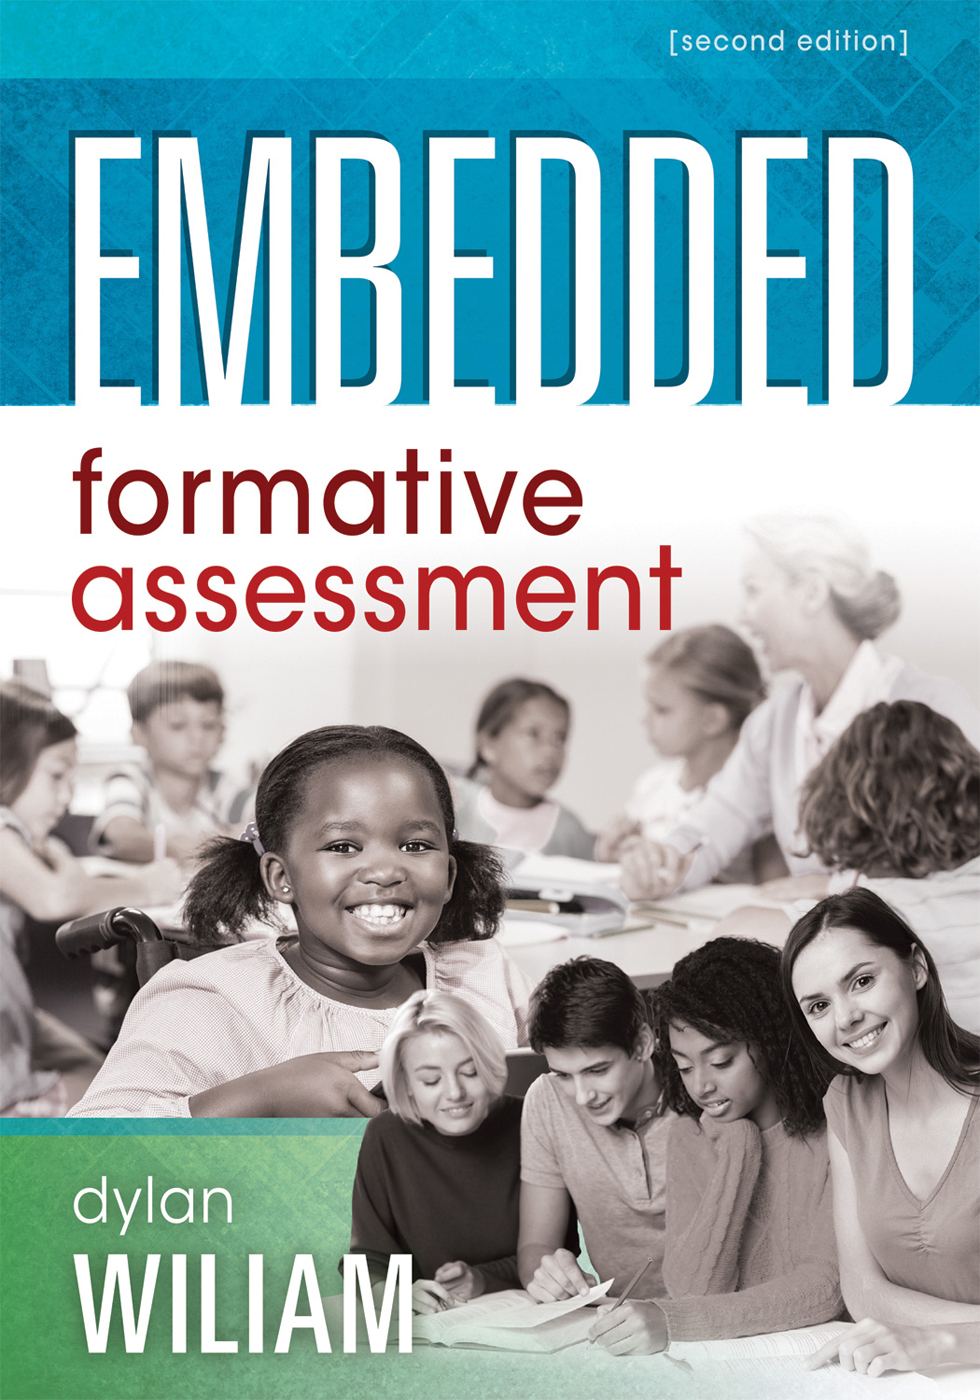 Embedded Formative Assessment (2nd Edition) by Dylan Wiliam